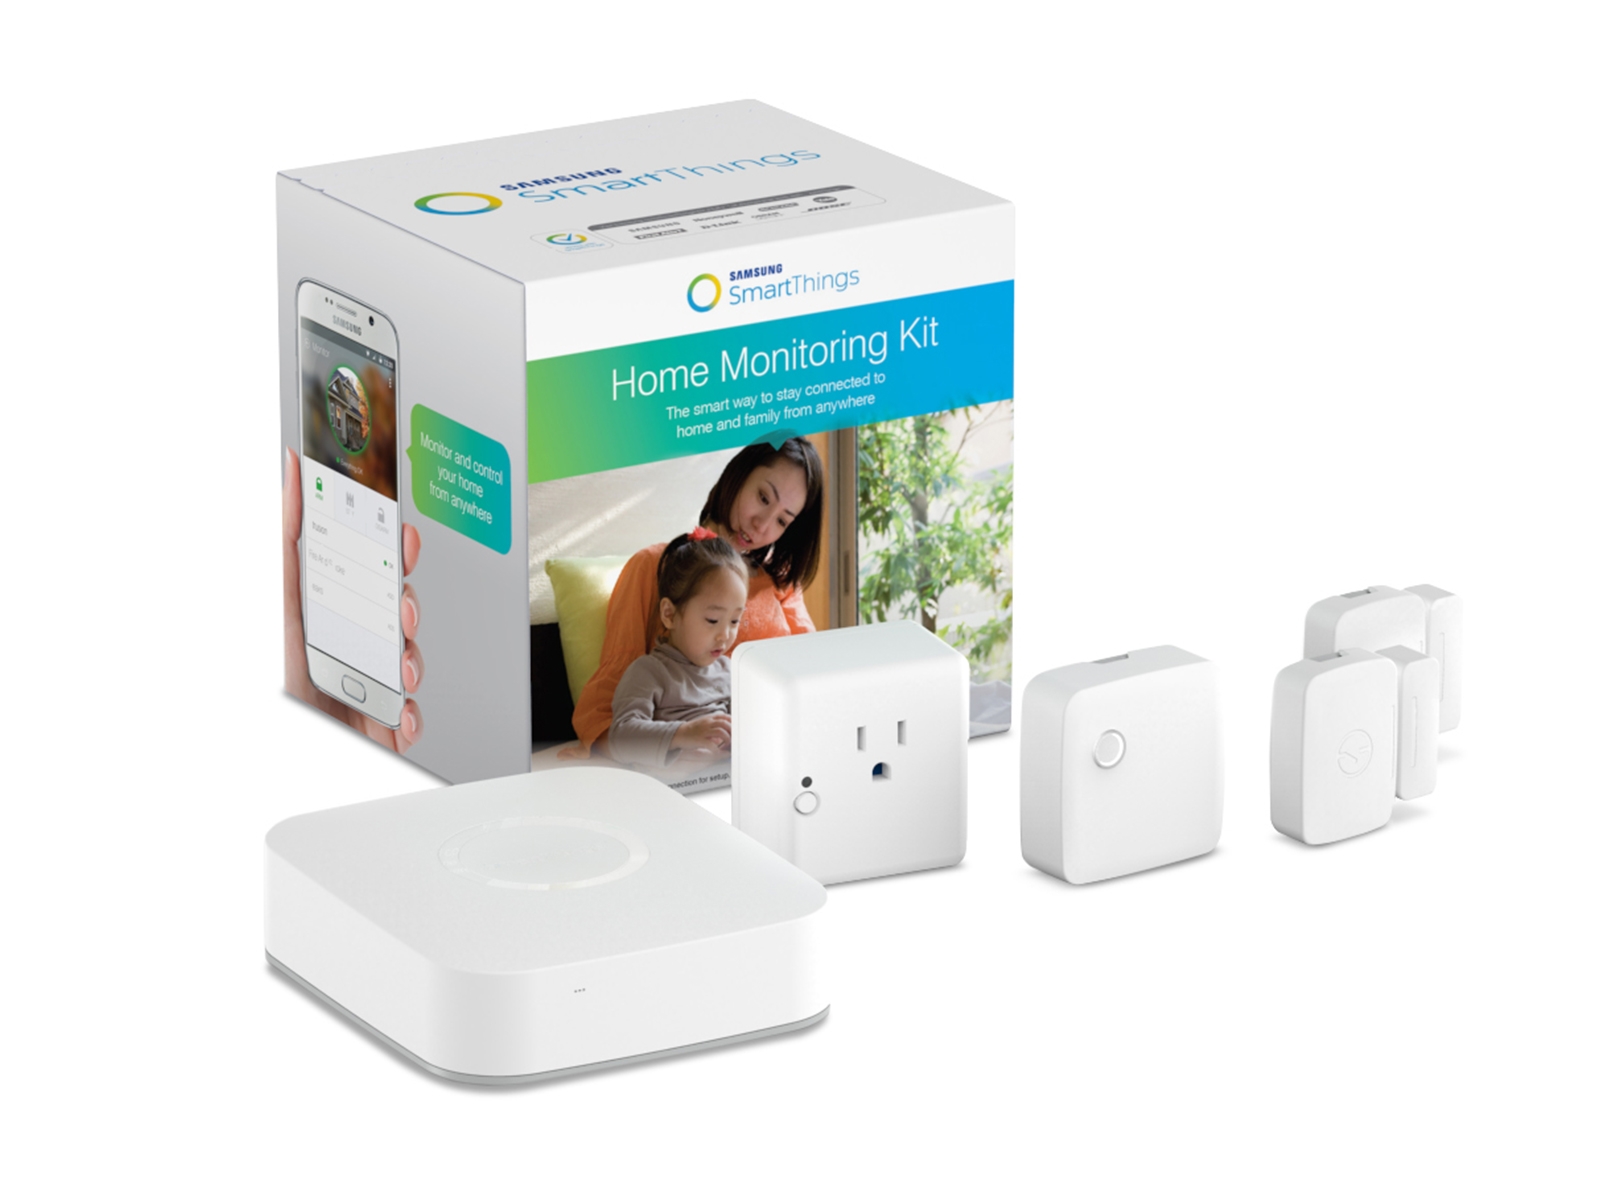 https://image-us.samsung.com/SamsungUS/home/smart-home/smartthings/kits/pd/f-mon-kit-1-12-1-17/new-122217/new-122217-fb/01-ST_USMonitoringKit_3-4_Package_Product.jpg?$feature-benefit-jpg$